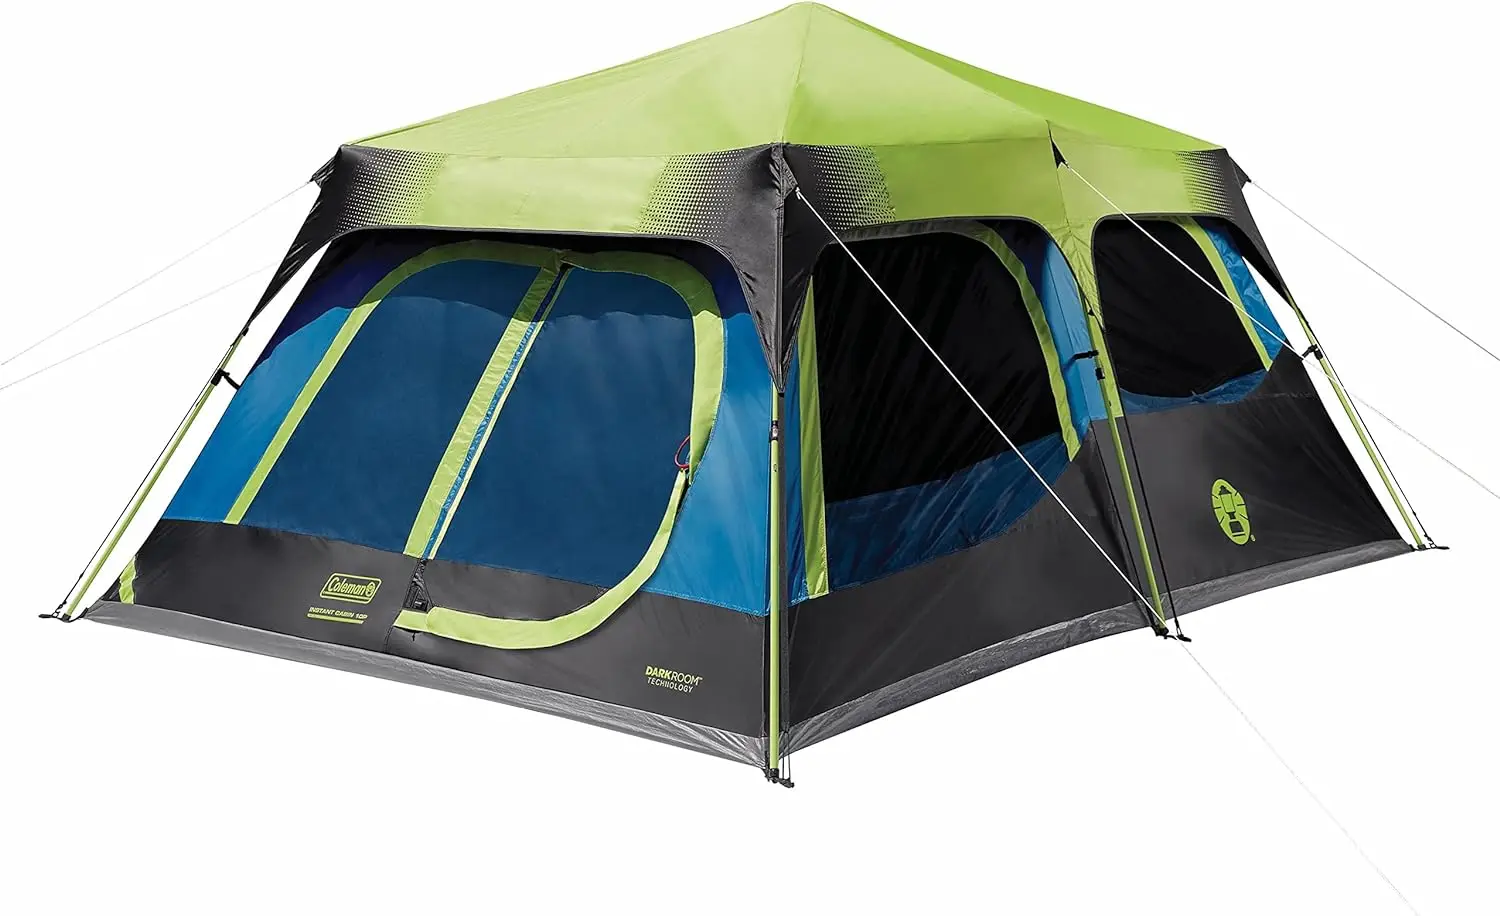 

Coleman Camping Tent with Instant Setup, 4/6/8/10 Person Weatherproof Tent with WeatherTec Technology, Double-Thick Fabric